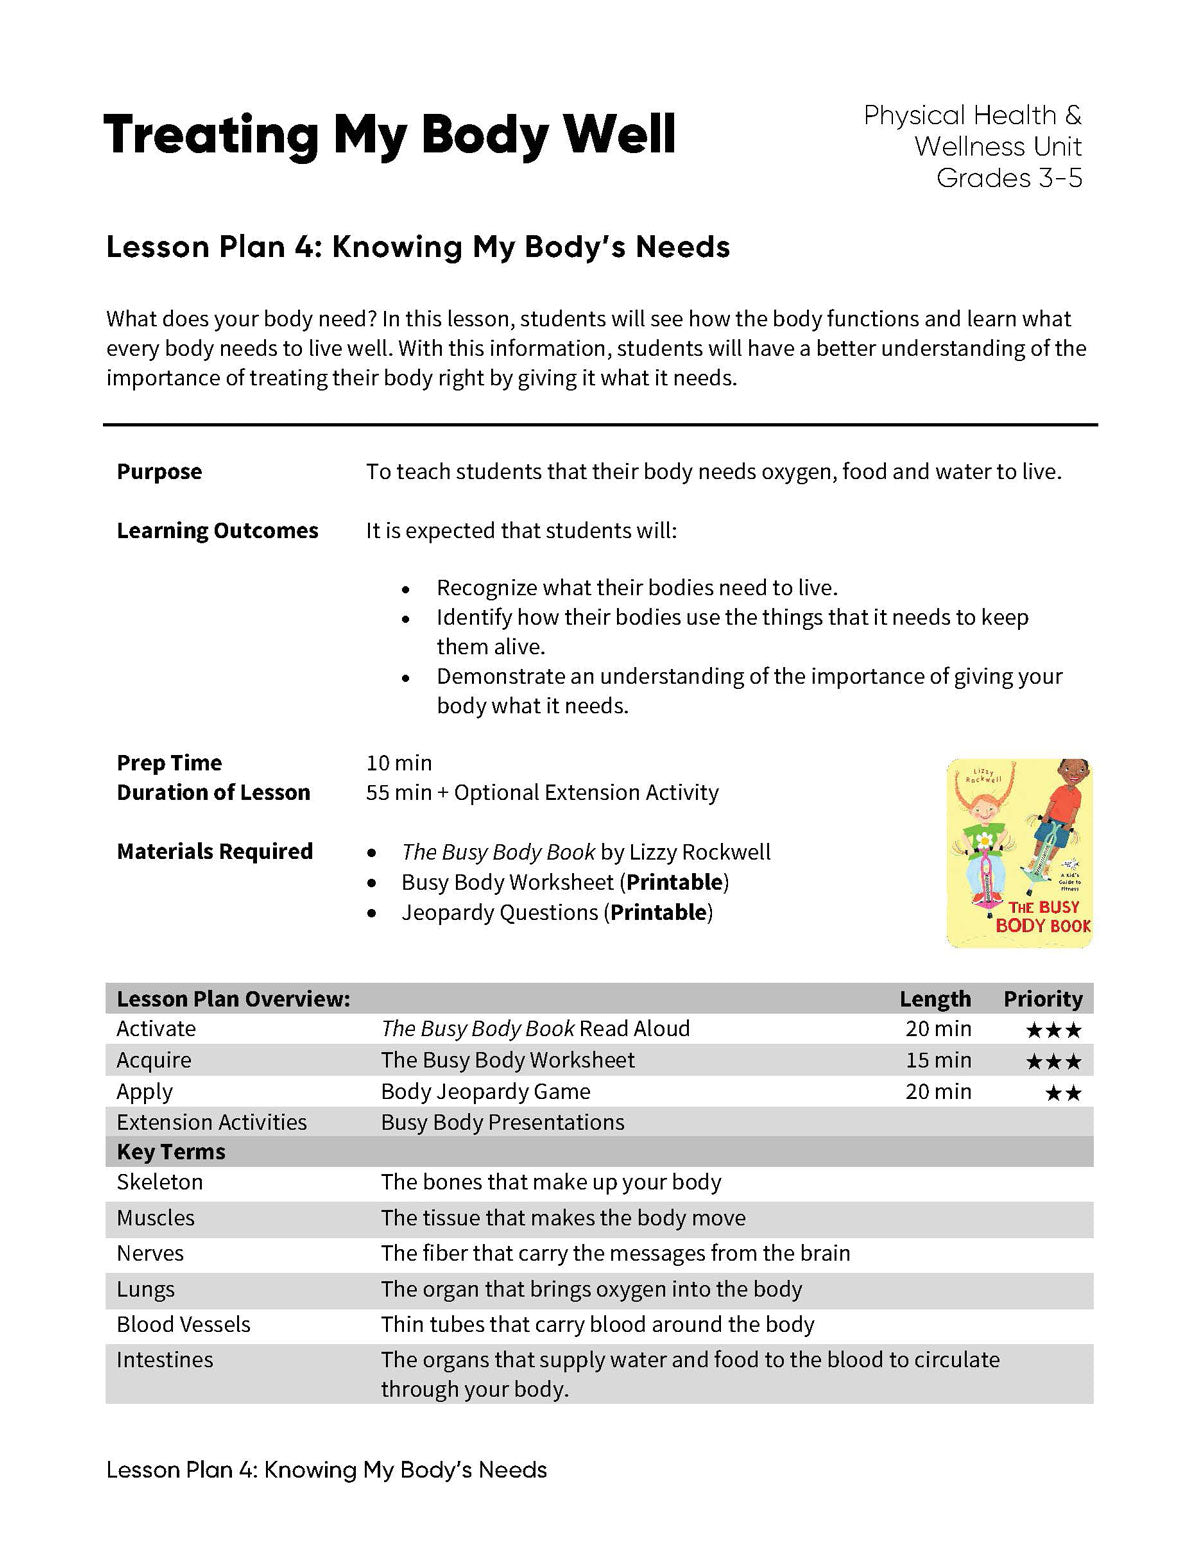 Lesson Plan 4: Knowing My Body's Needs